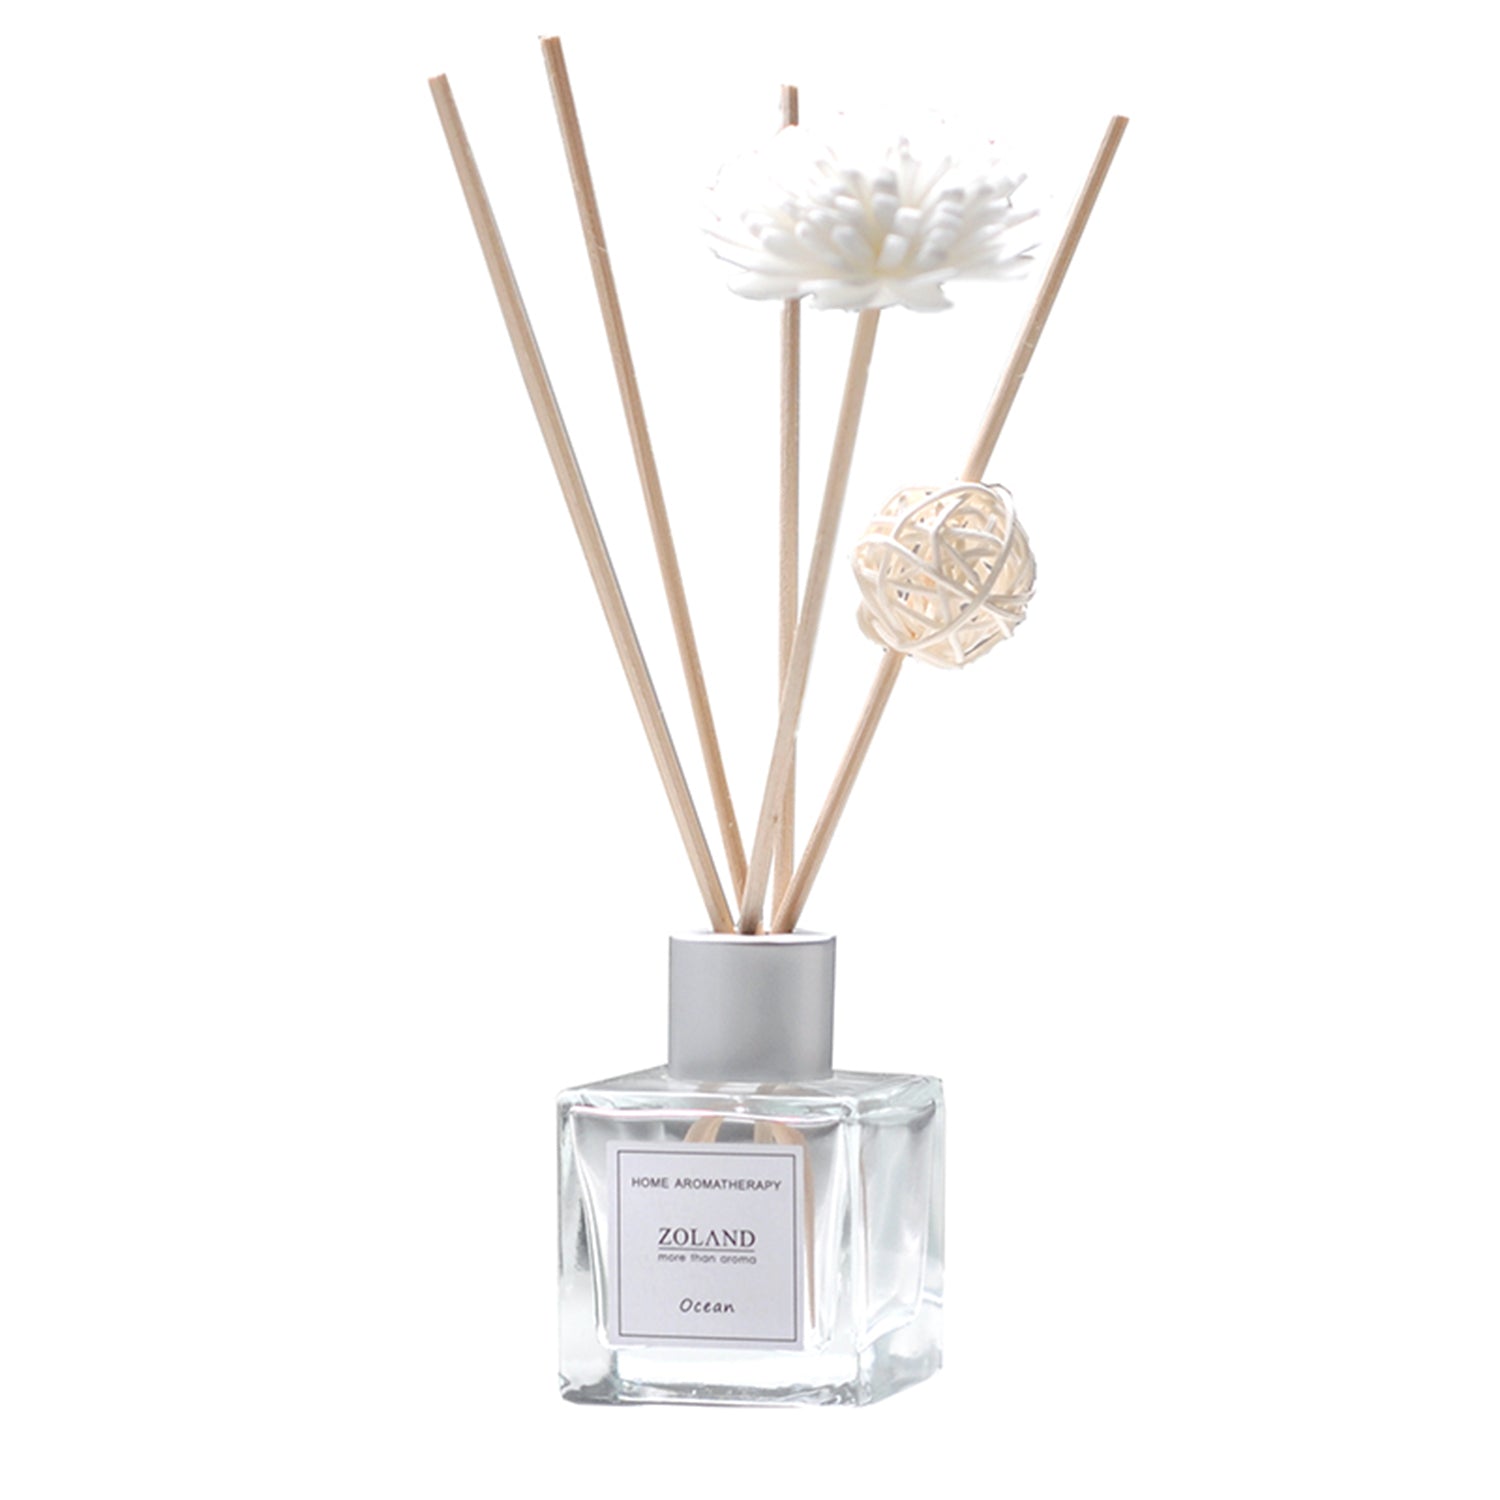 ZOLAND Reed Diffuser 50ML Premium Essential Oil Aromatherapy Square Bottle with Reed Stick and Sola Flower Reed Diffuser ZOLAND Cool Water 